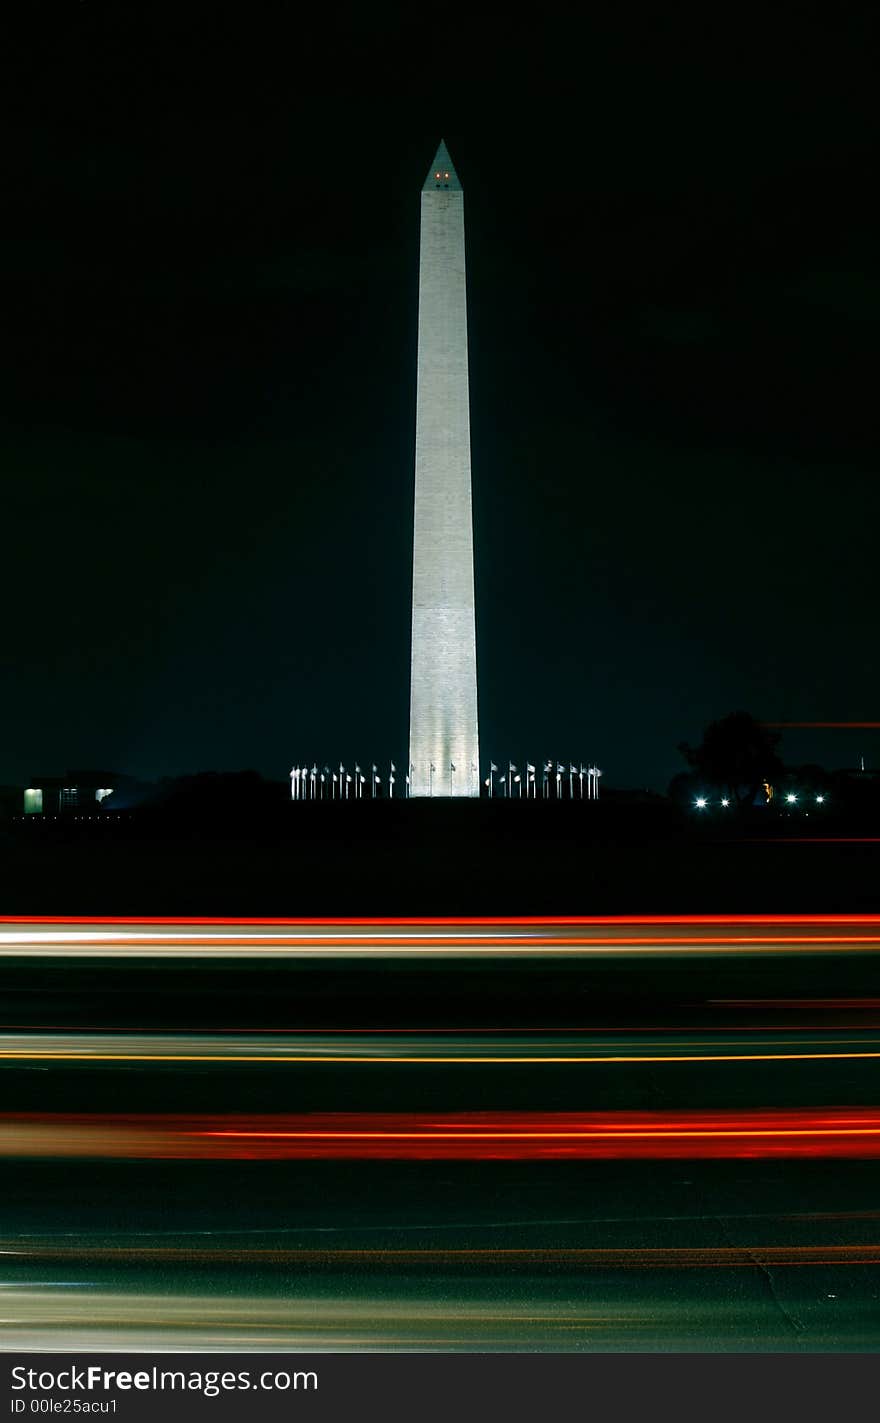 Night shot of the washington monument in washington D.C. - foreground with motion blurred traffic